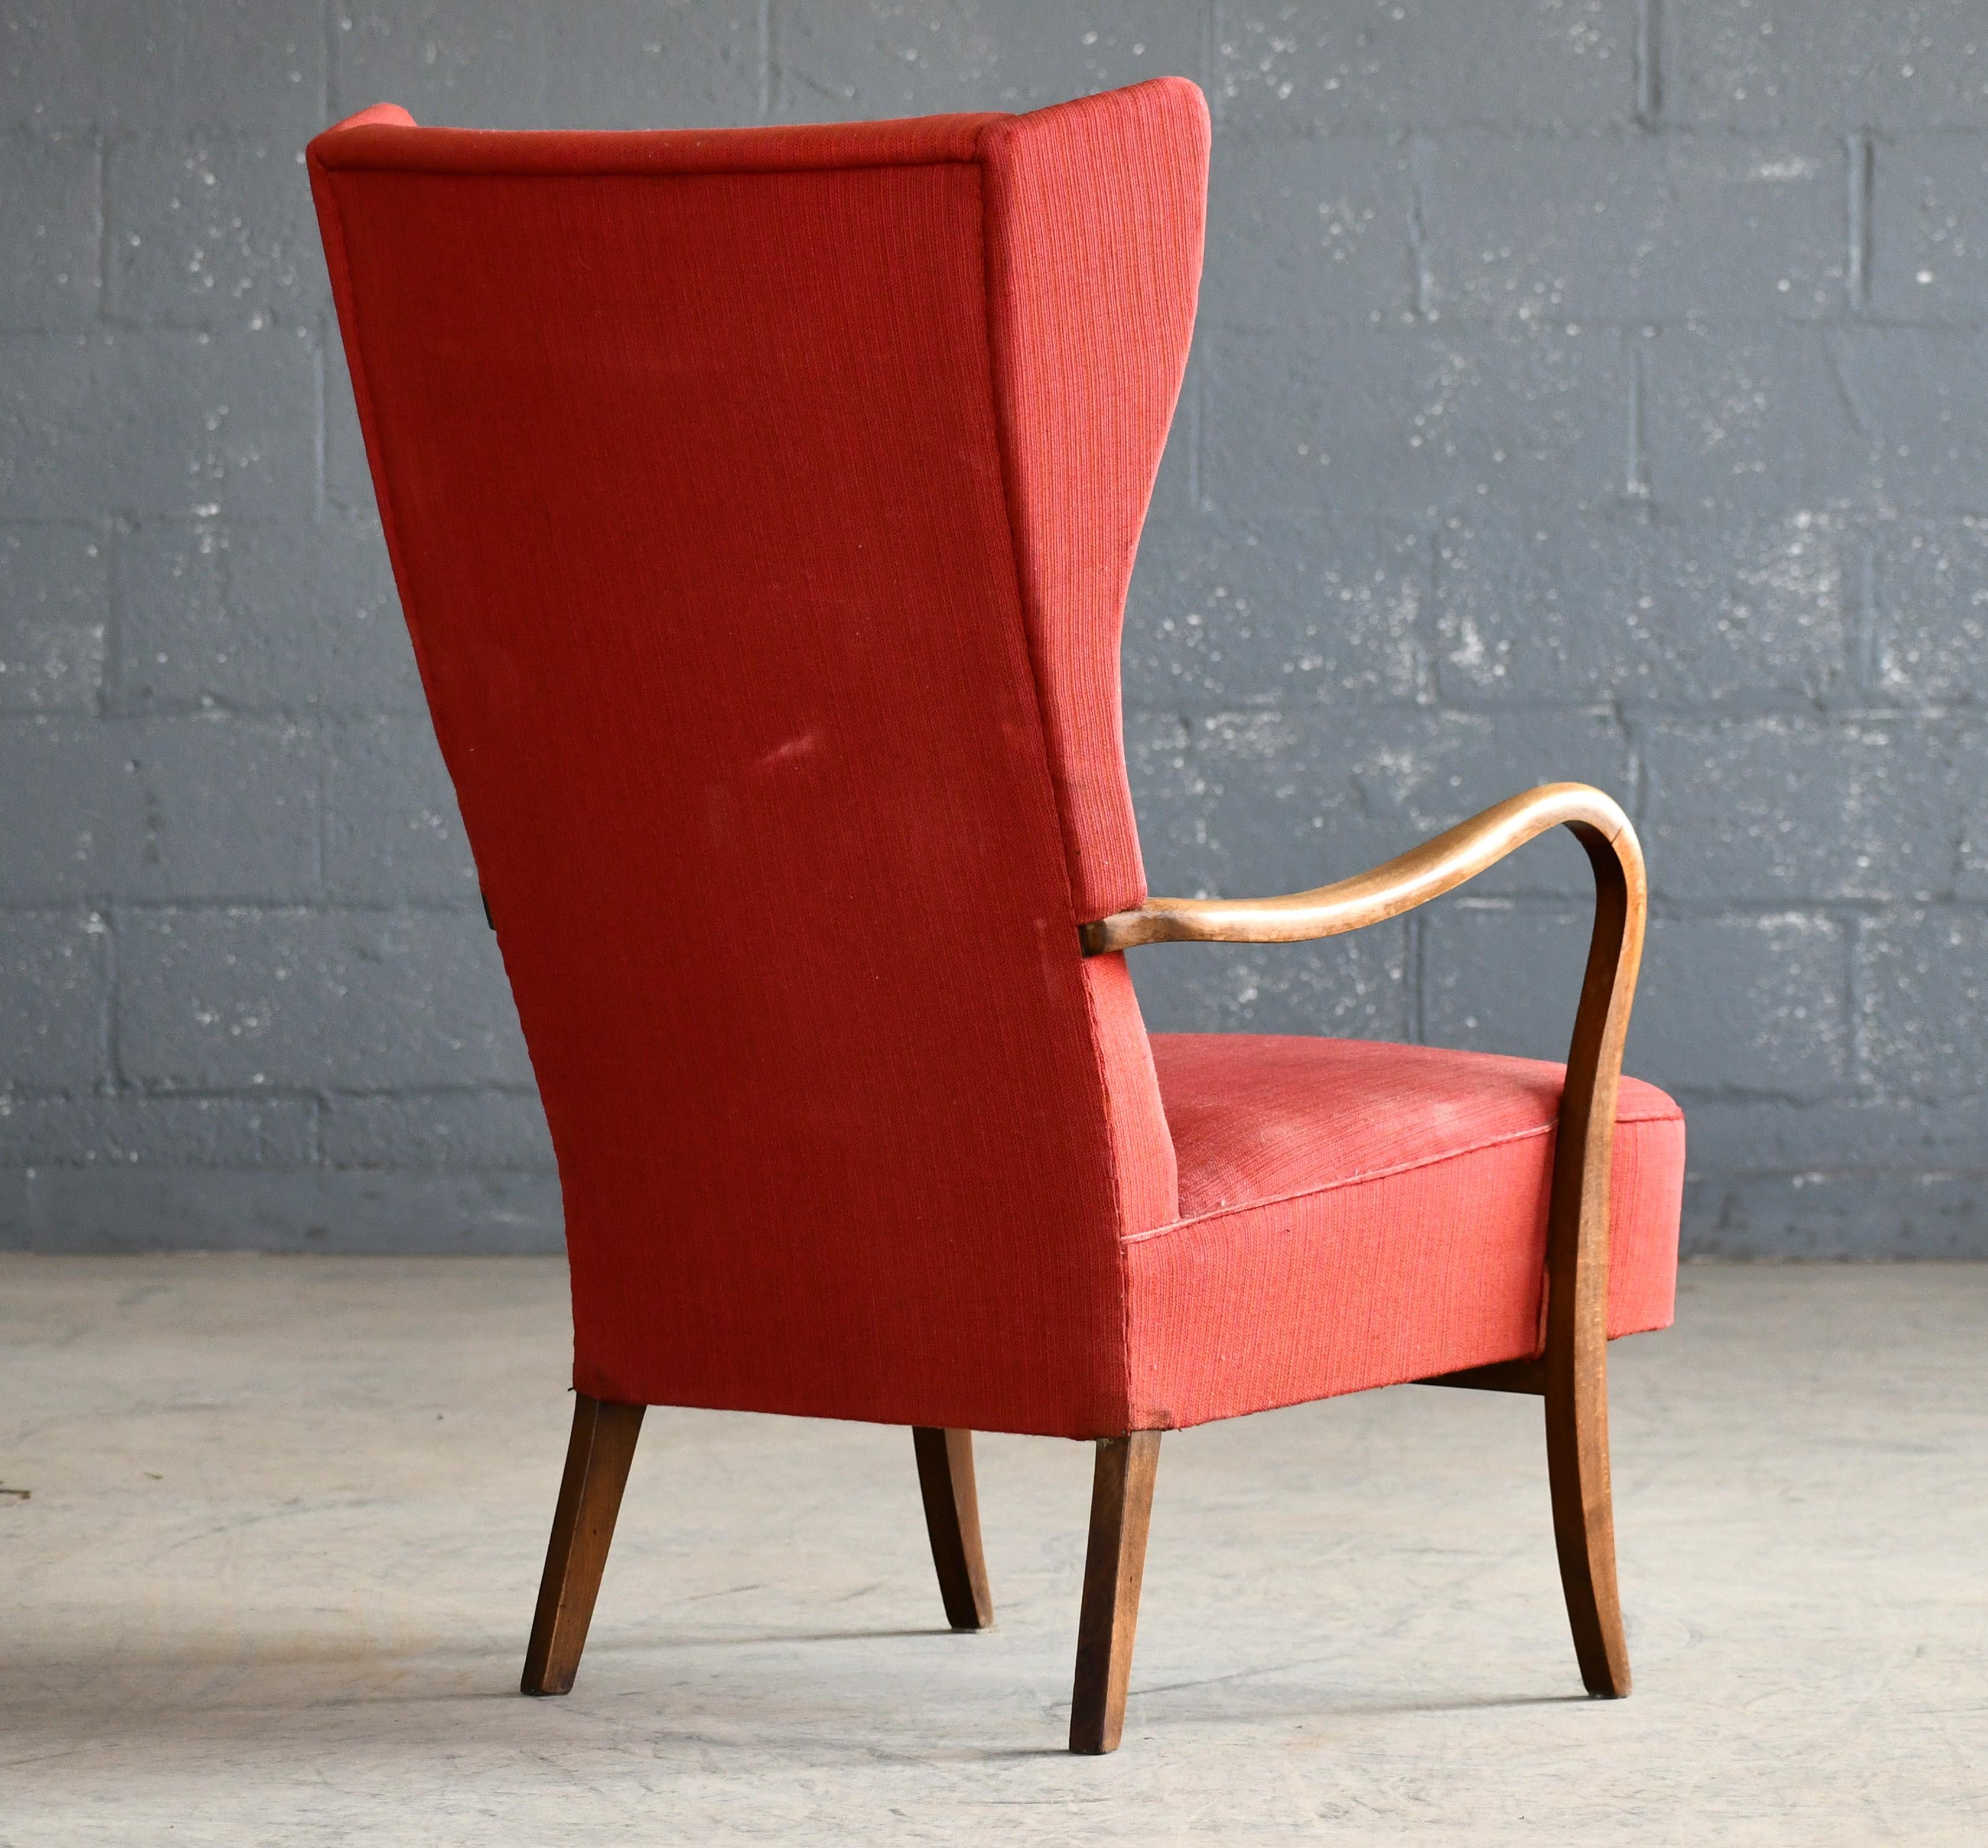 Mid-20th Century Danish Easy Wingback Chair with Open Armrests by Alfred Christensen, 1940's For Sale